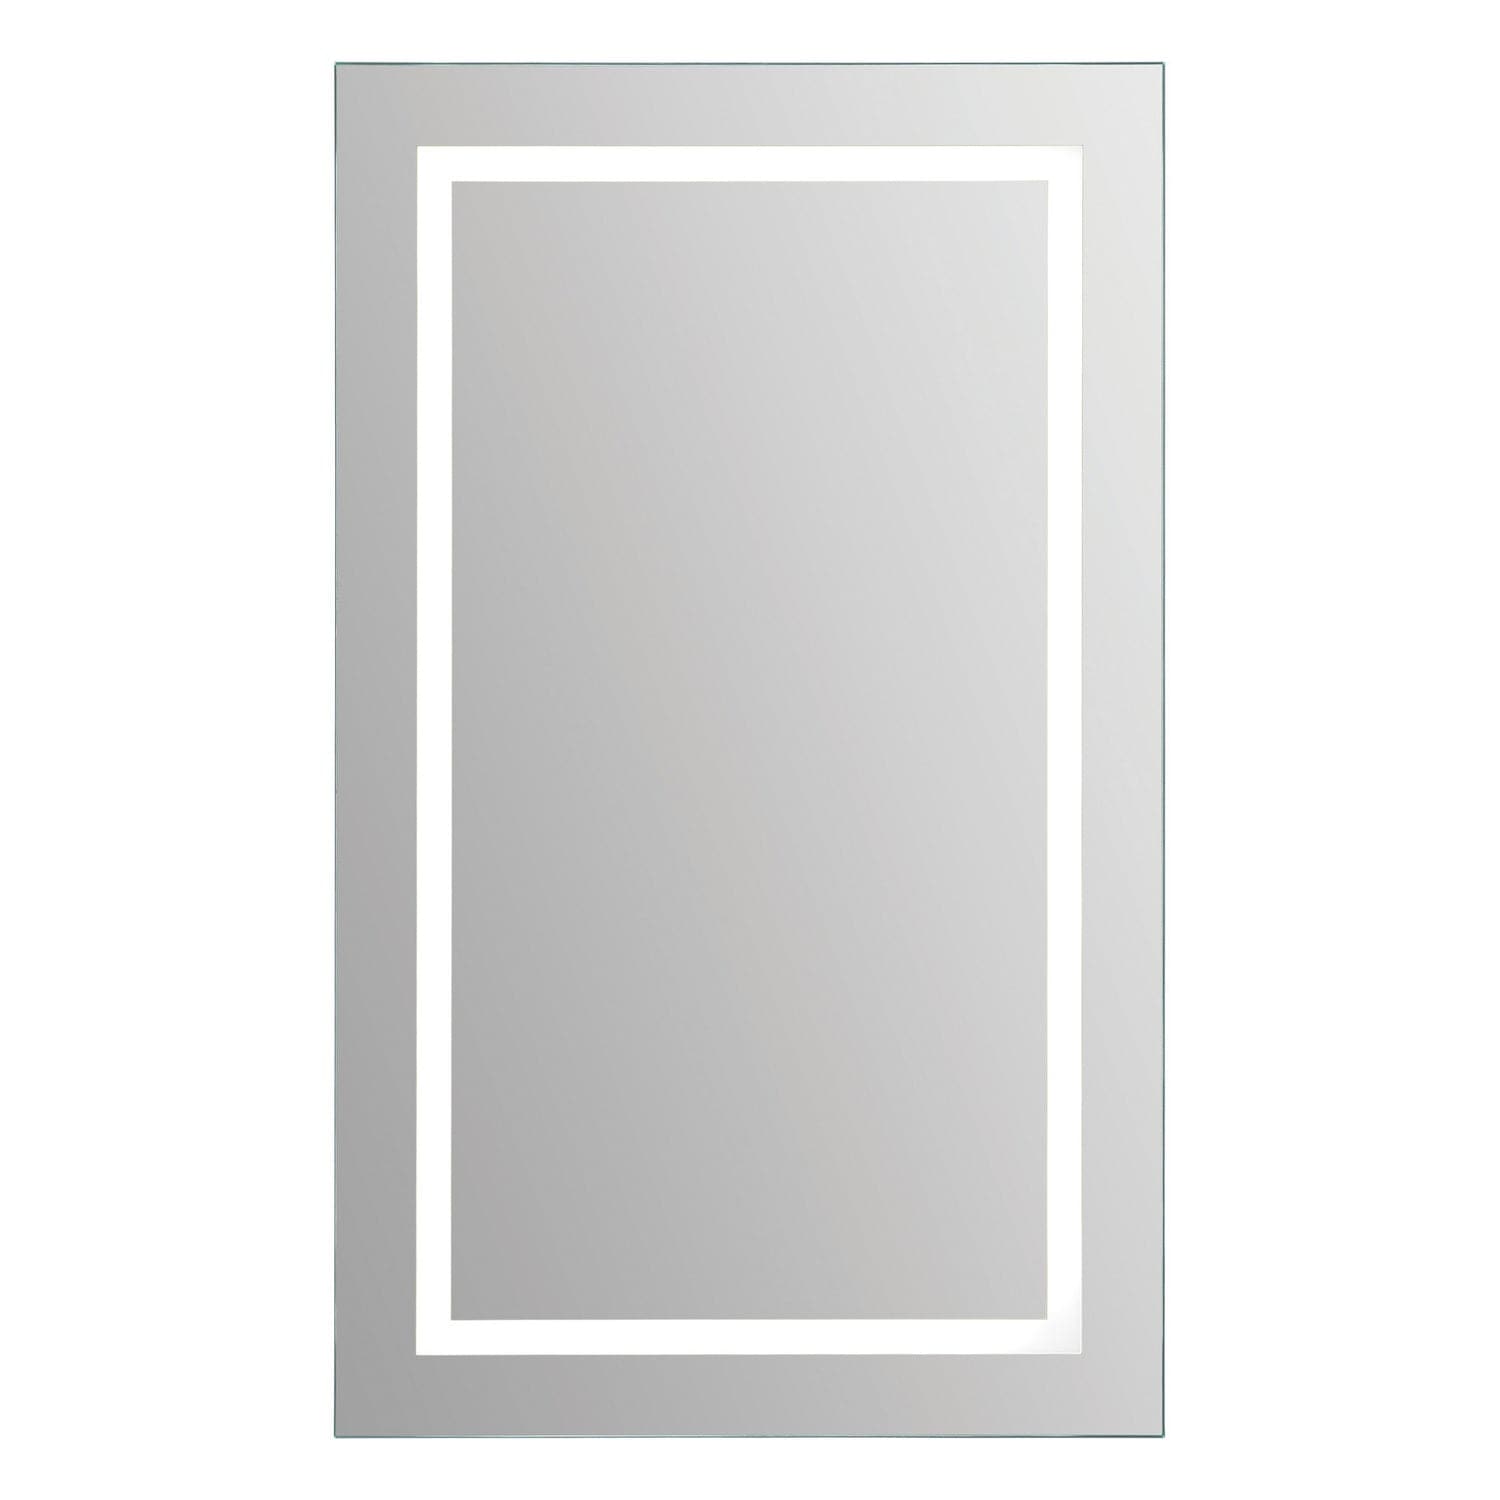 Renwil - MT1354 - Mirror - Adele Led - Clear Glass